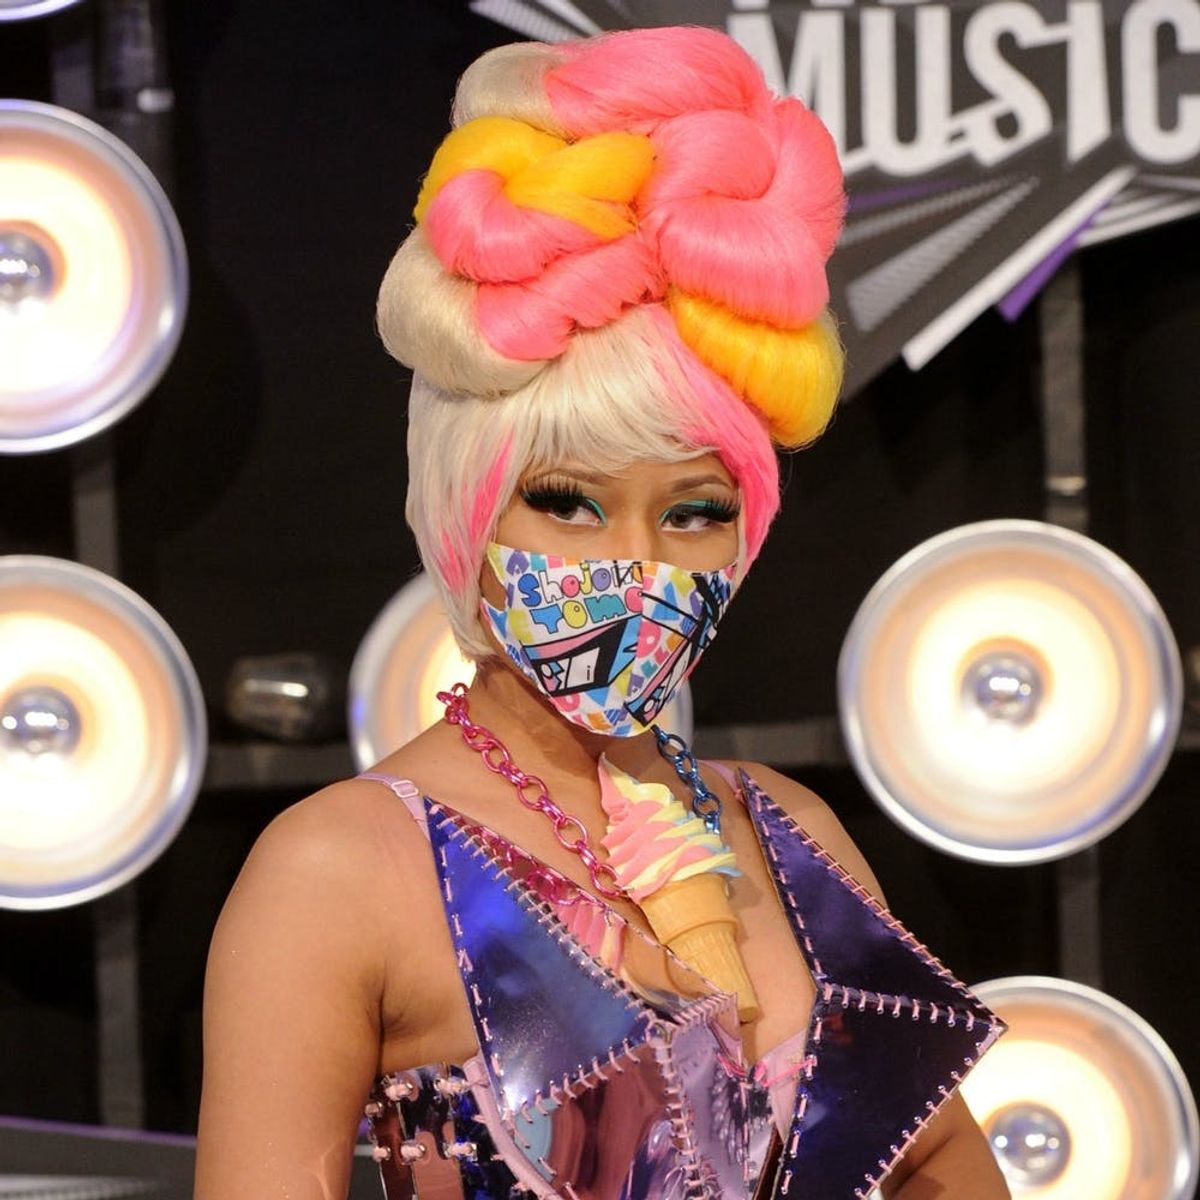 20 of the Most WTF VMA Looks of All Time